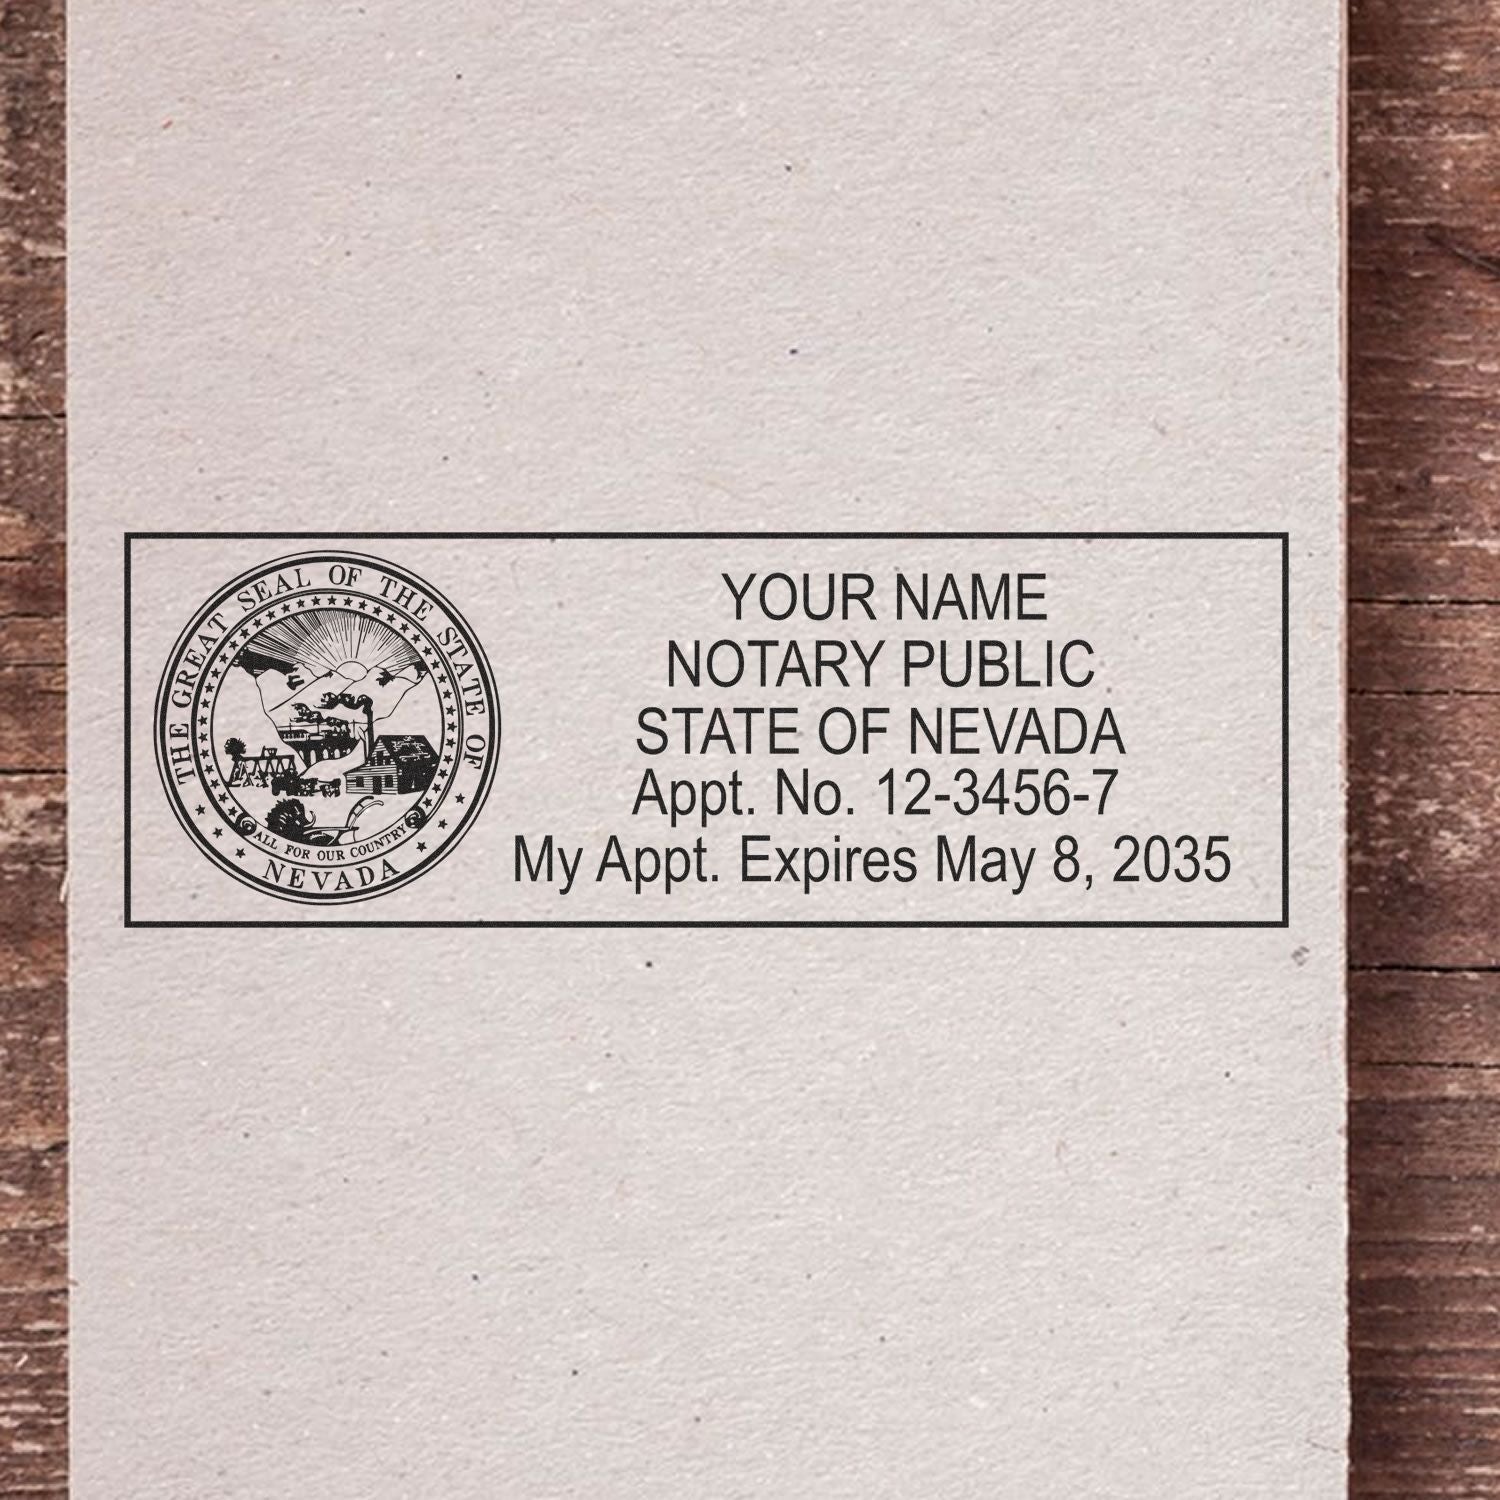 A lifestyle photo showing a stamped image of the Heavy-Duty Nevada Rectangular Notary Stamp on a piece of paper